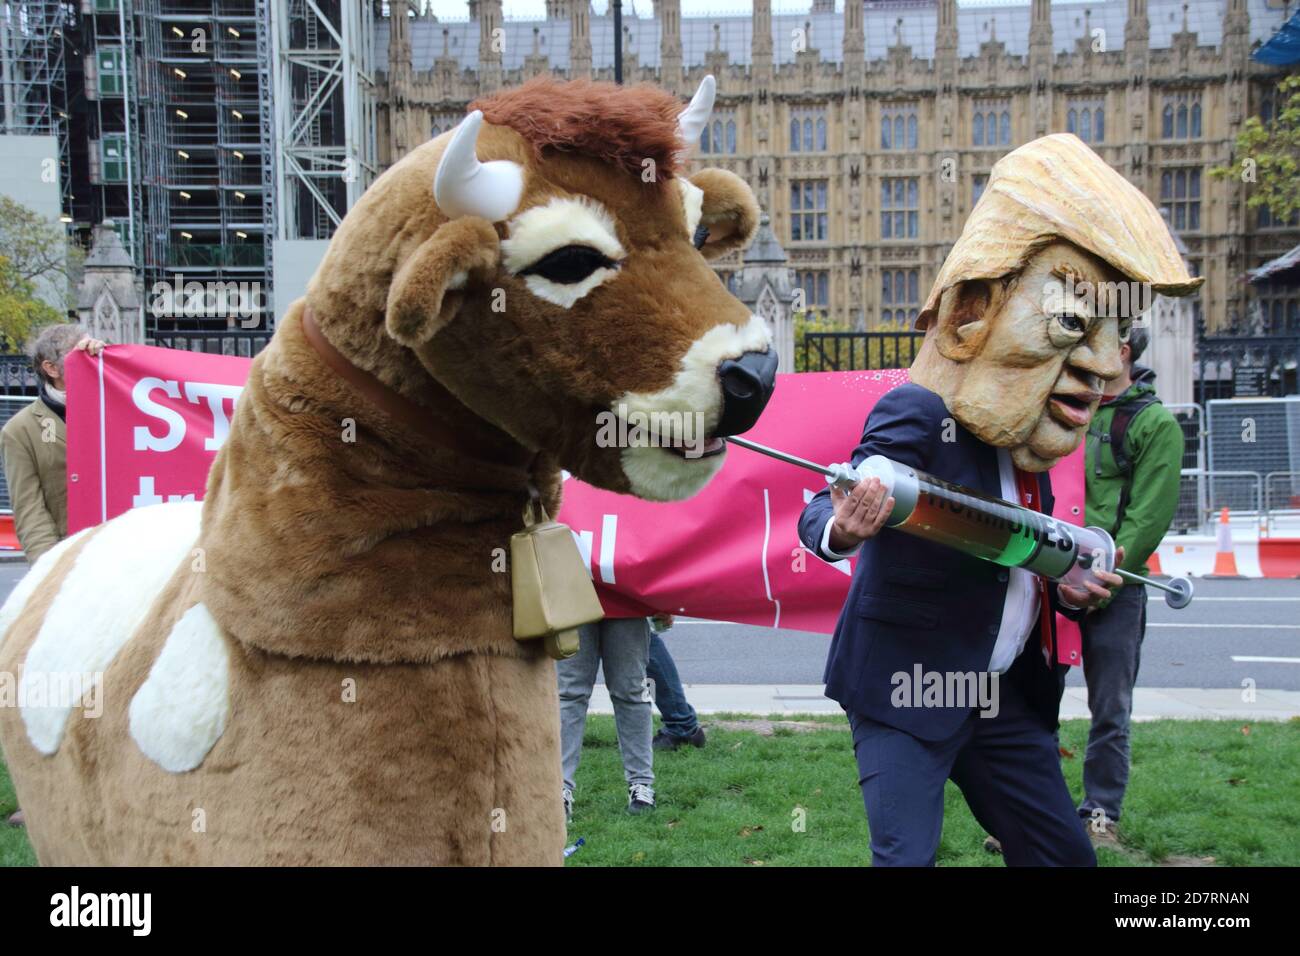 London, UK. 24th Oct, 2020. A man dressed in a fake Donald Trump and a businessman costume injects hormones to a Pantomine cow during the protest.Stop Trump, Stop the post Brexit Trade Deal protest in Parliament Square. Action against the NHS being opened up permanently to American healthcare companies. Chlorinated chicken AND hormone-laced beef and lowering of food standards. Plus the forced deregulation of environmental laws and our rights to data privacy. Credit: SOPA Images Limited/Alamy Live News Stock Photo